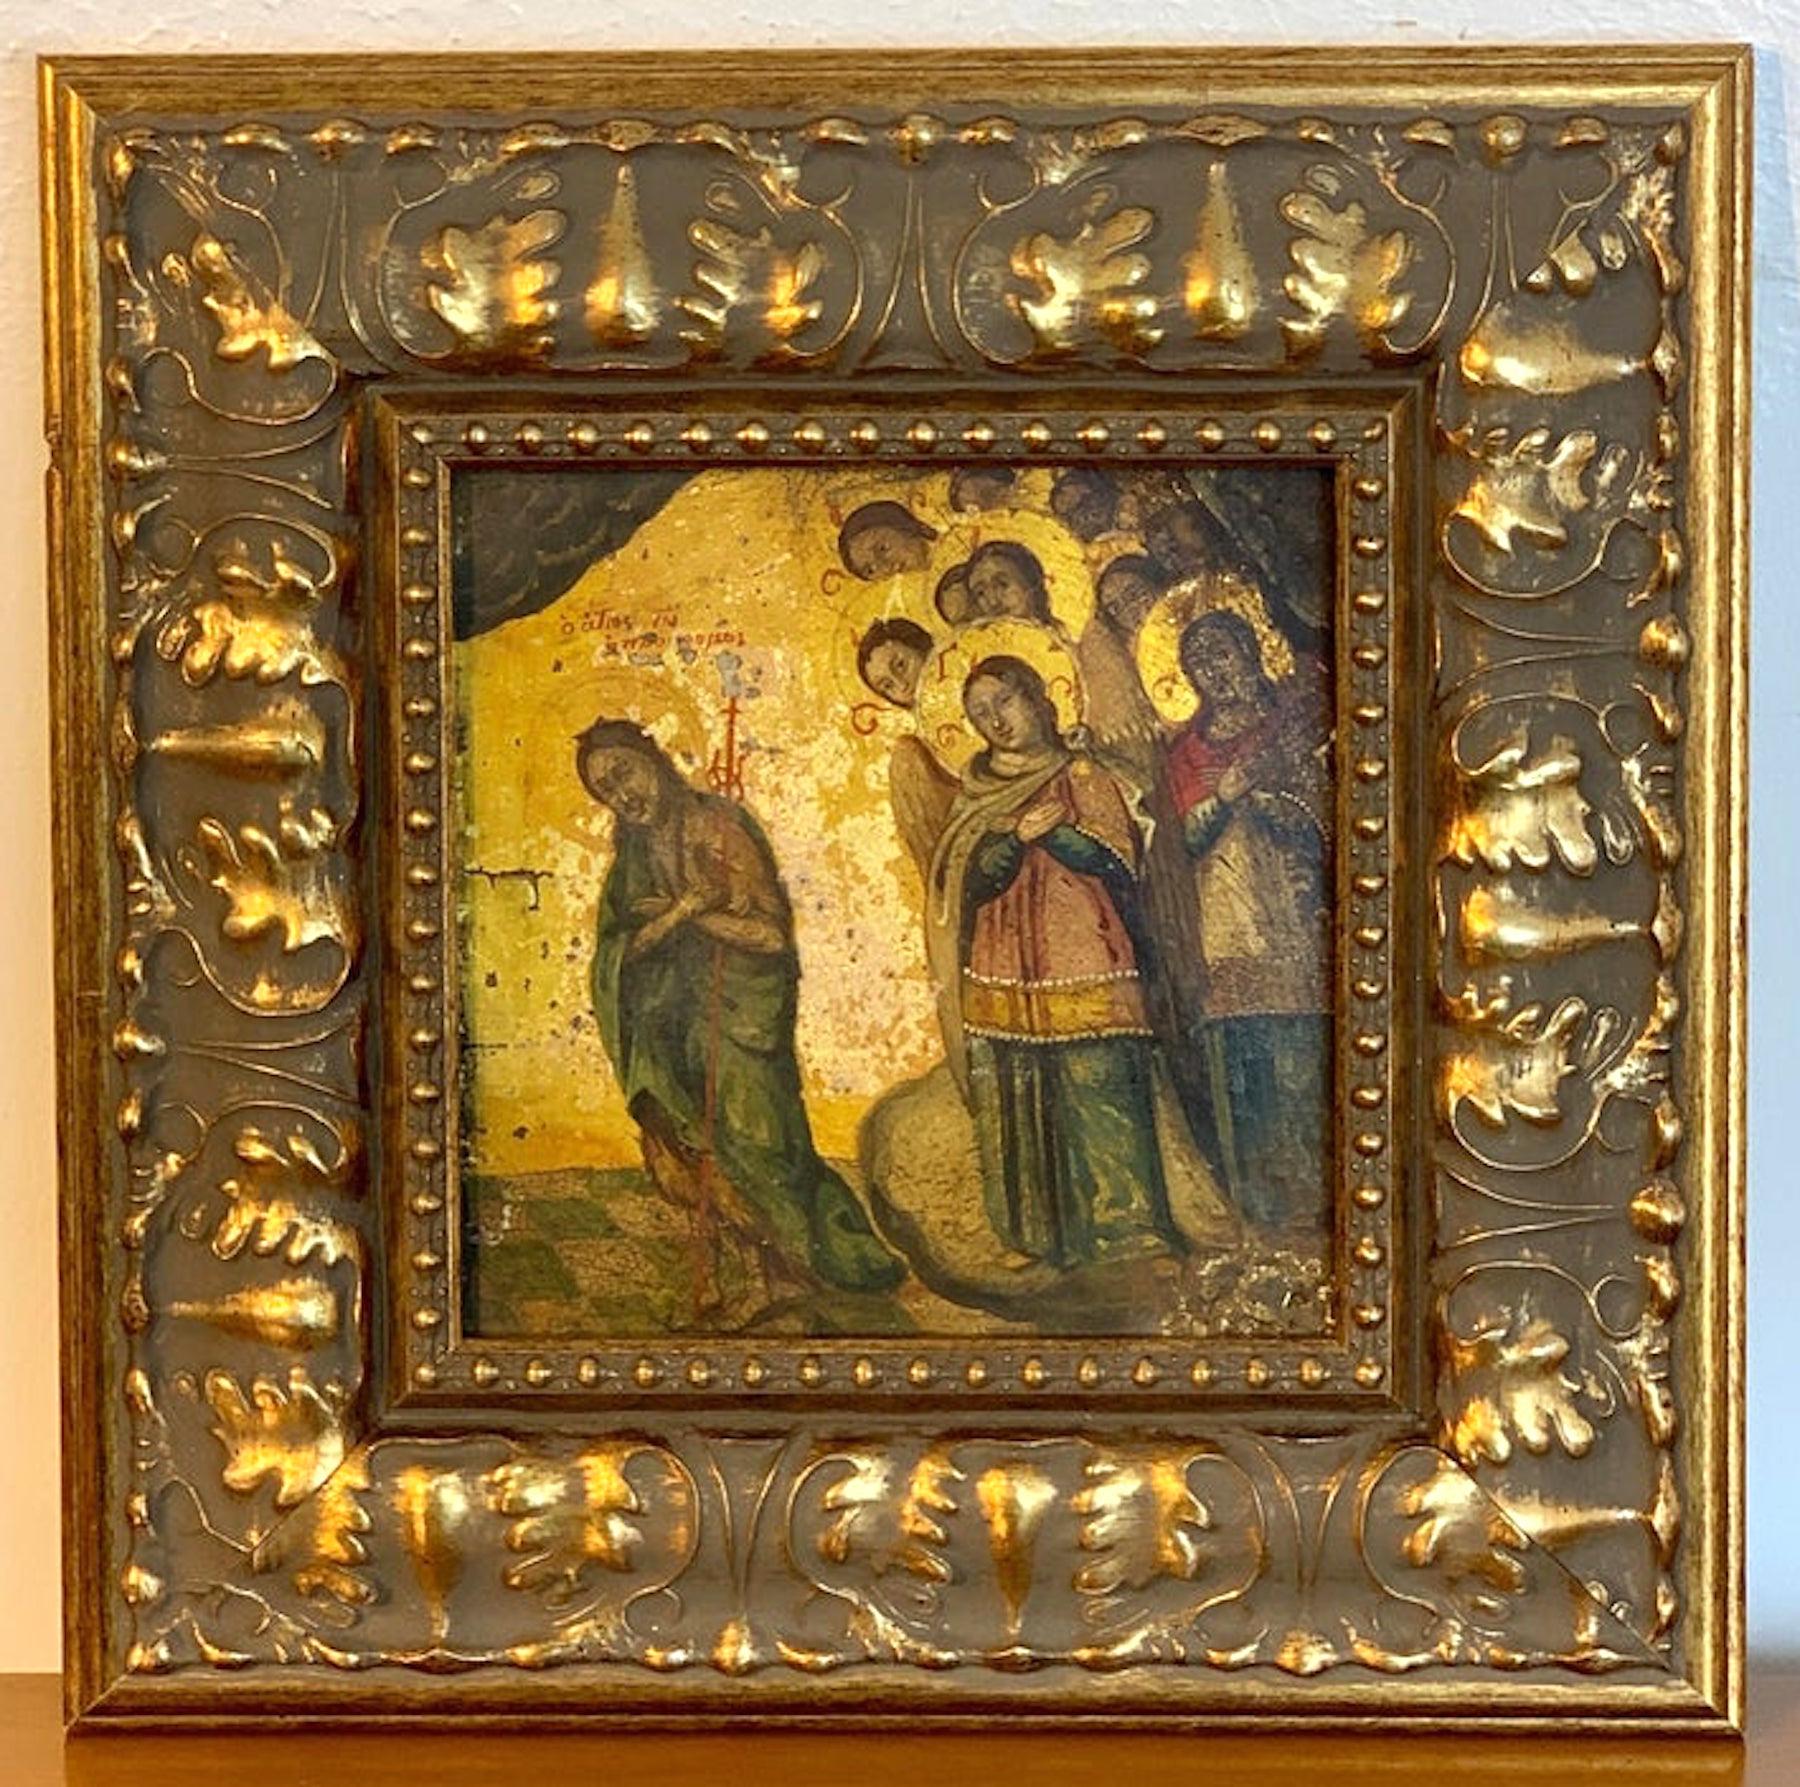 Russian 18th-19th century icon of anastasis, later gitwood frame 
A fine example of the Resurrection or Anastasis, beautifully painted and inscribed, in untouched antique condition. 
Measures: 8